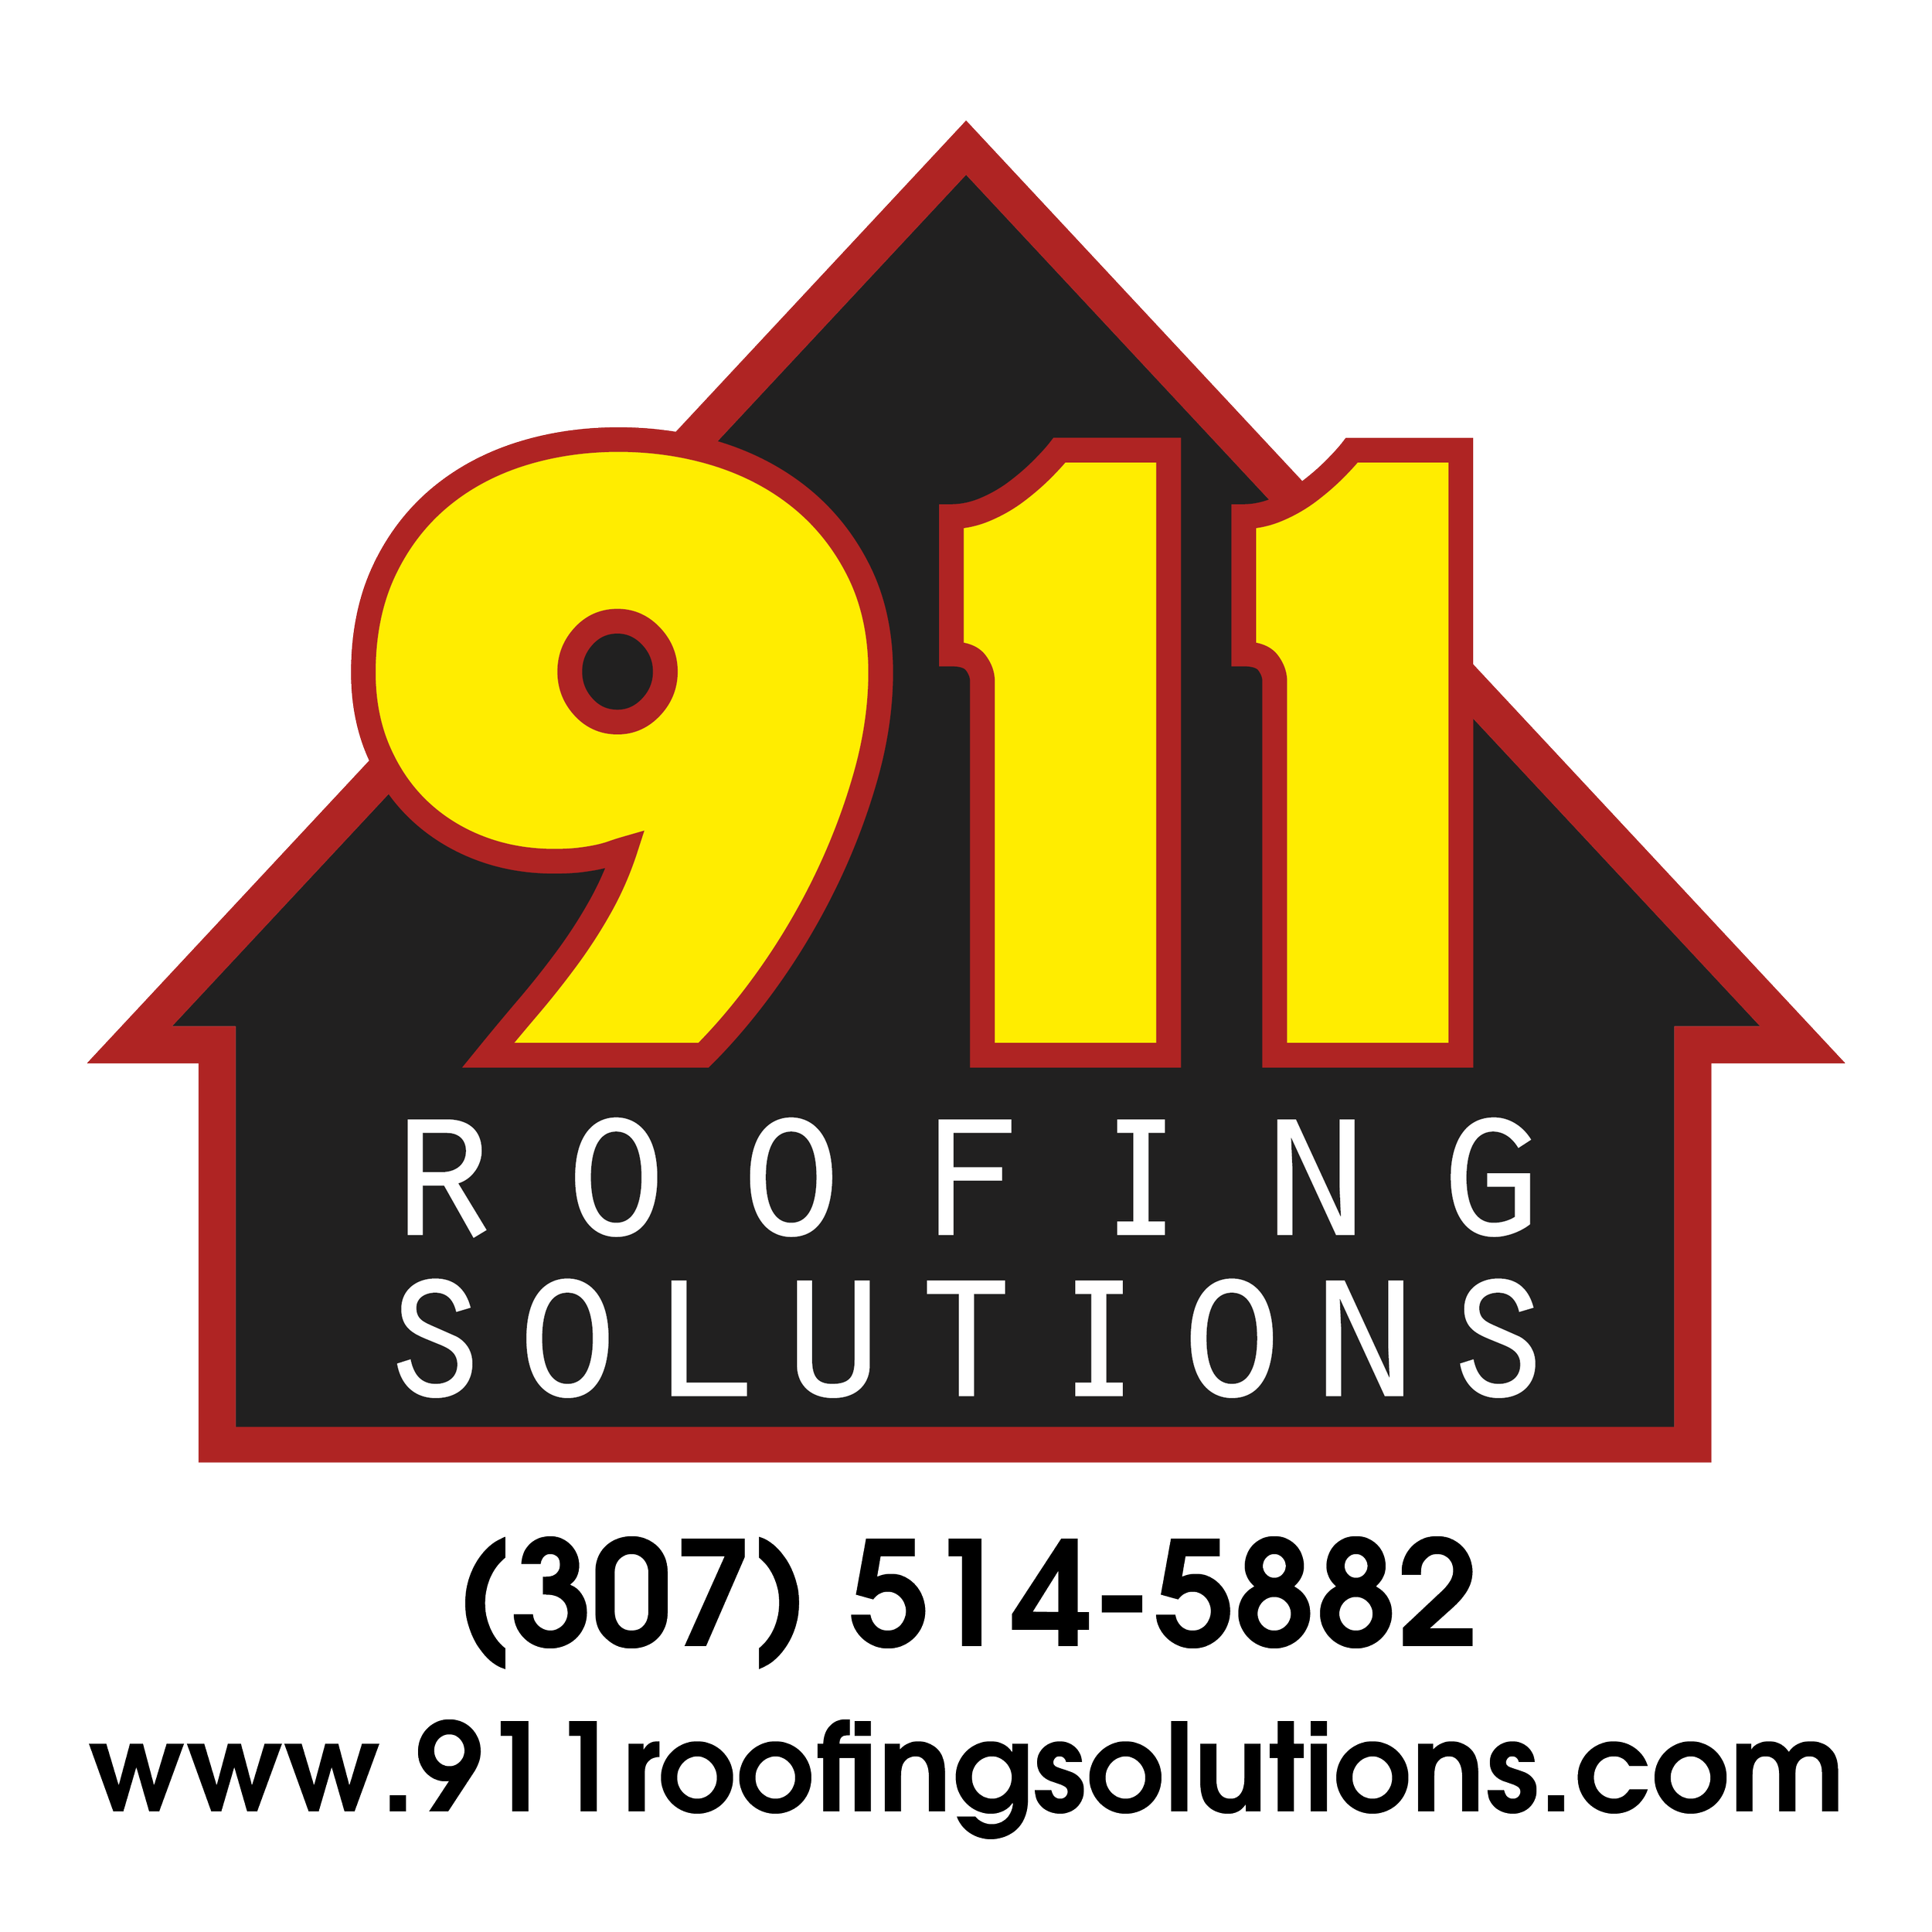 Presenting_911 Roofing_LOGO PNG (1).png